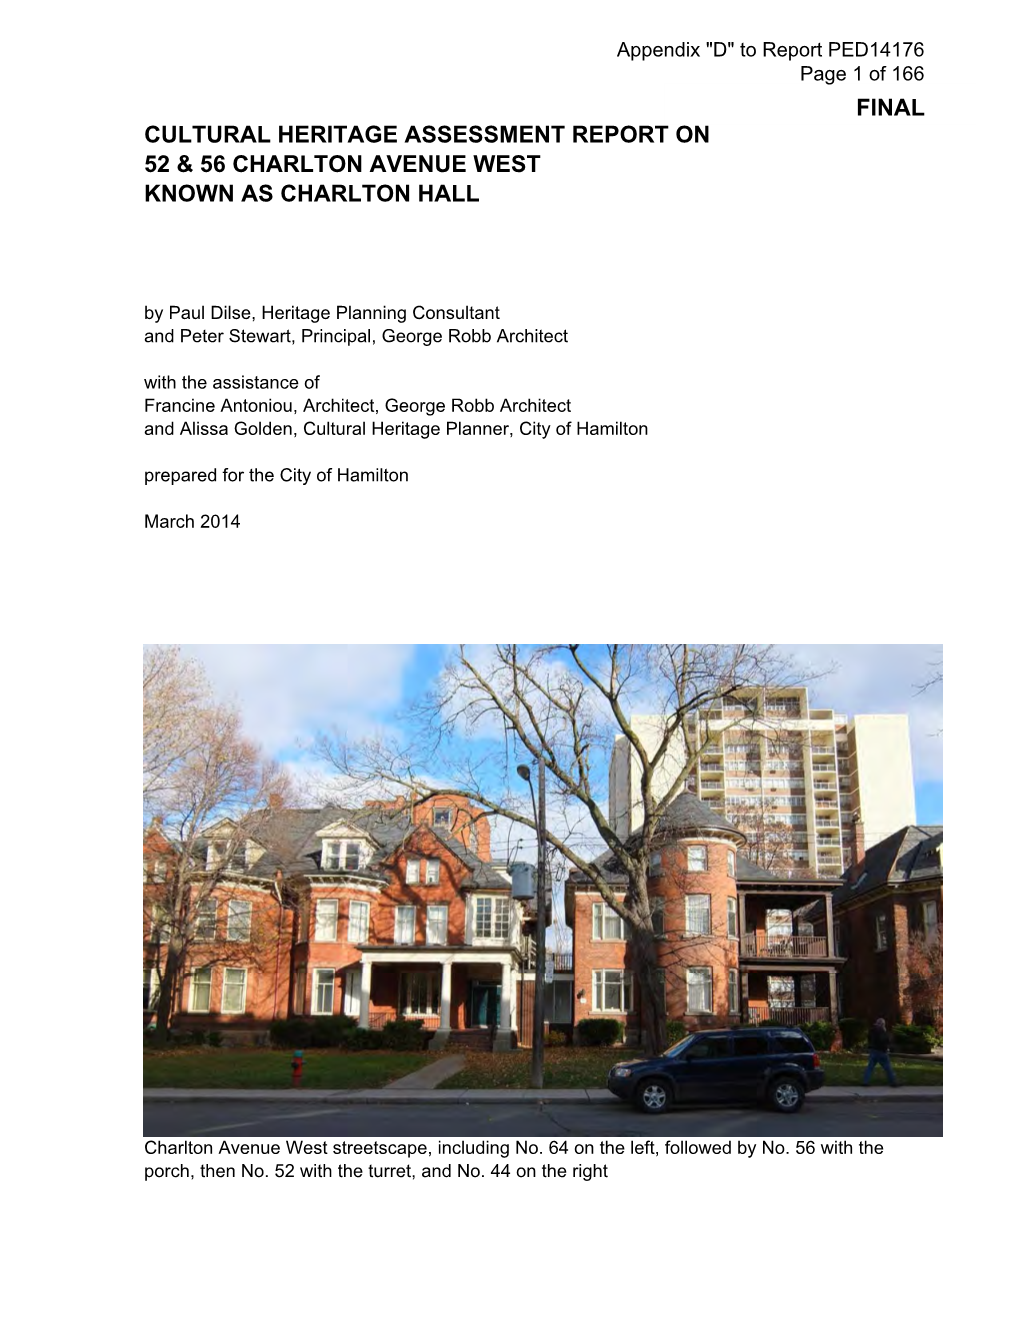 Cultural Heritage Assessment Report on 52 & 56 Charlton Avenue West Known As Charlton Hall